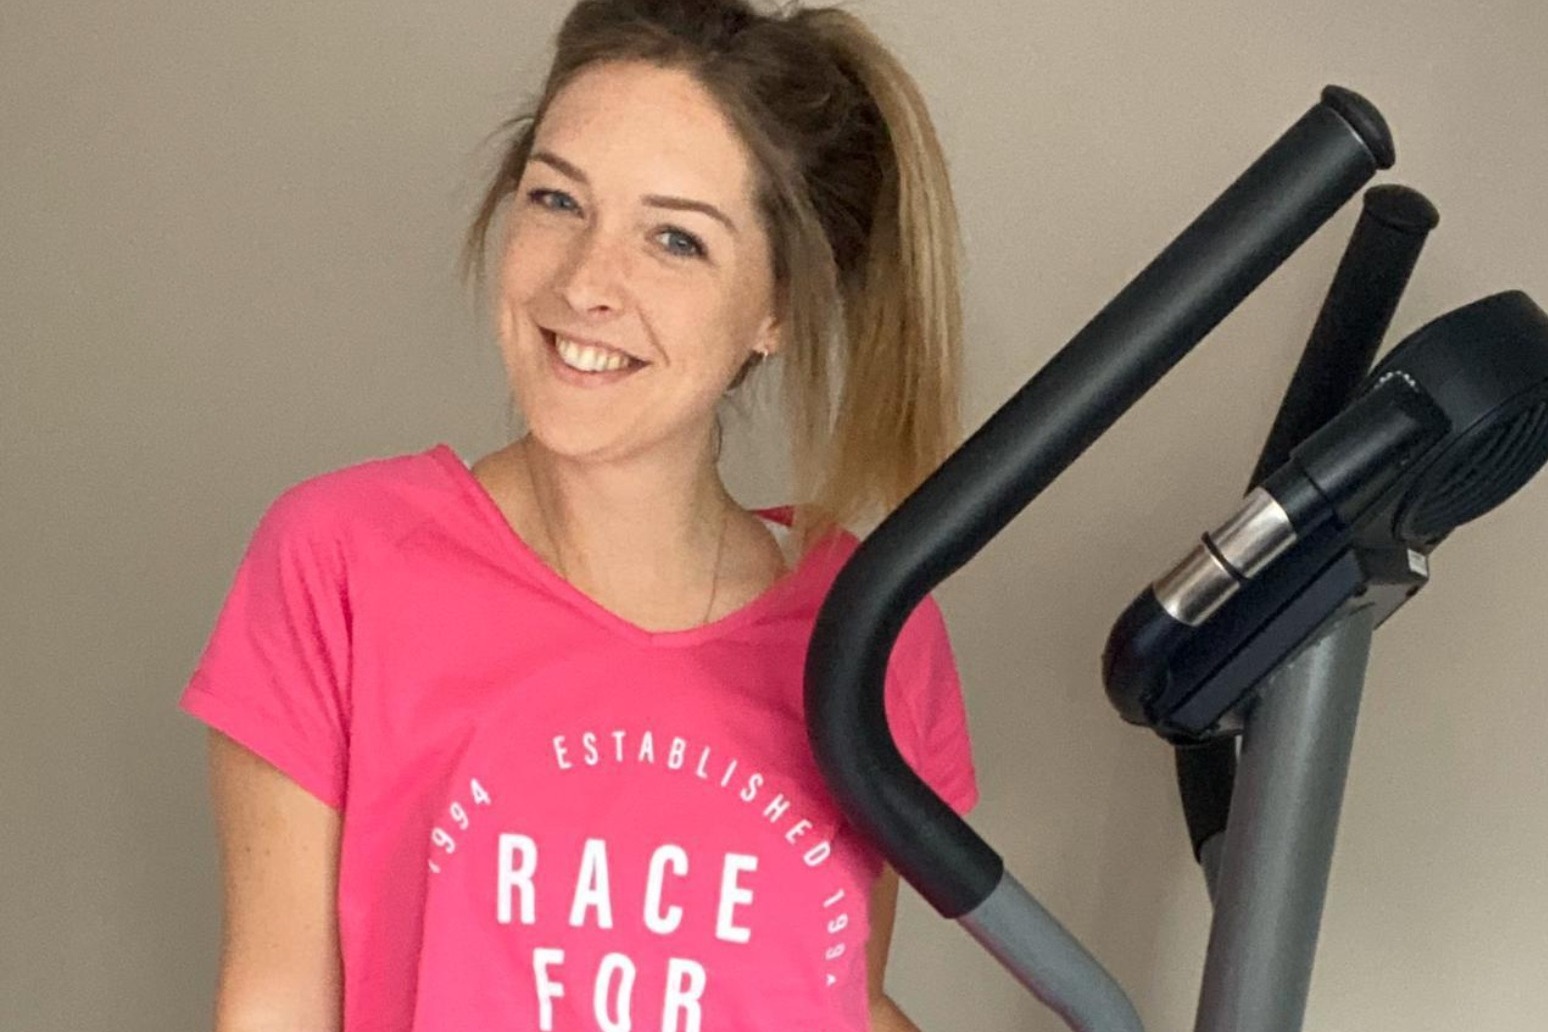 \'Sisters\' with incurable cancer back lockdown race for life at home 